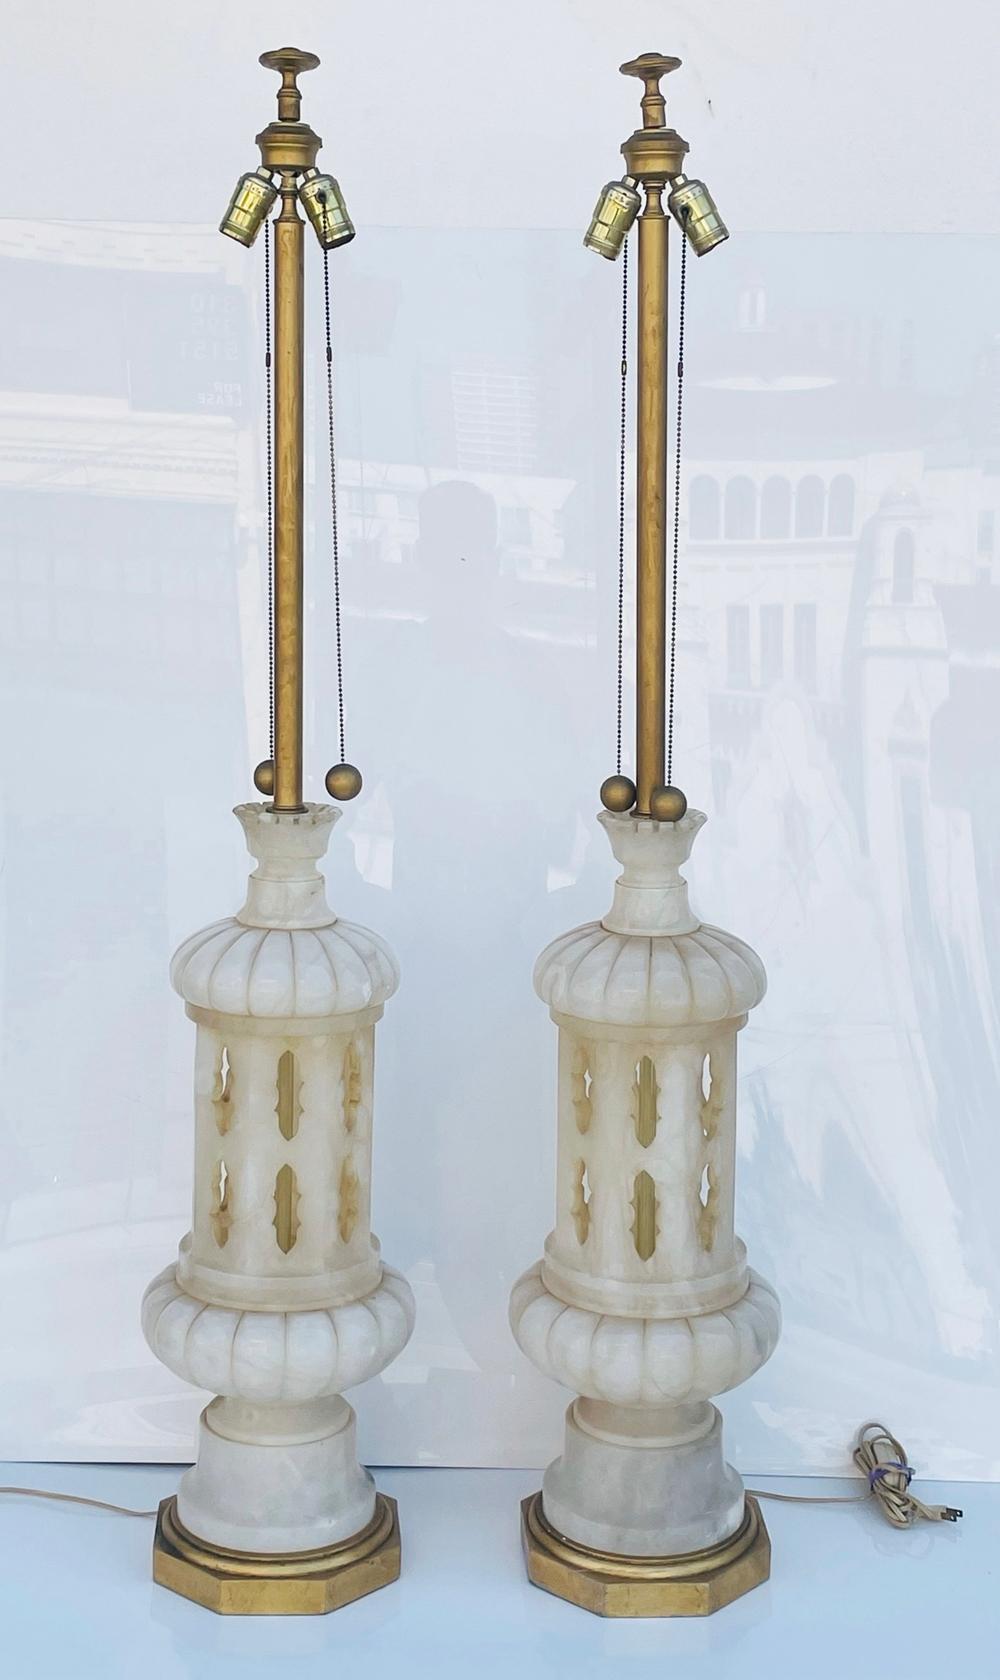 Monumental Pair of Marble Lamps, Italy 1960's. These sophisticated lamps are a true testament to Italian craftsmanship and elegance. 



Crafted with utmost precision, each lamp is made from high-quality marble with stunning gold accents, adding a